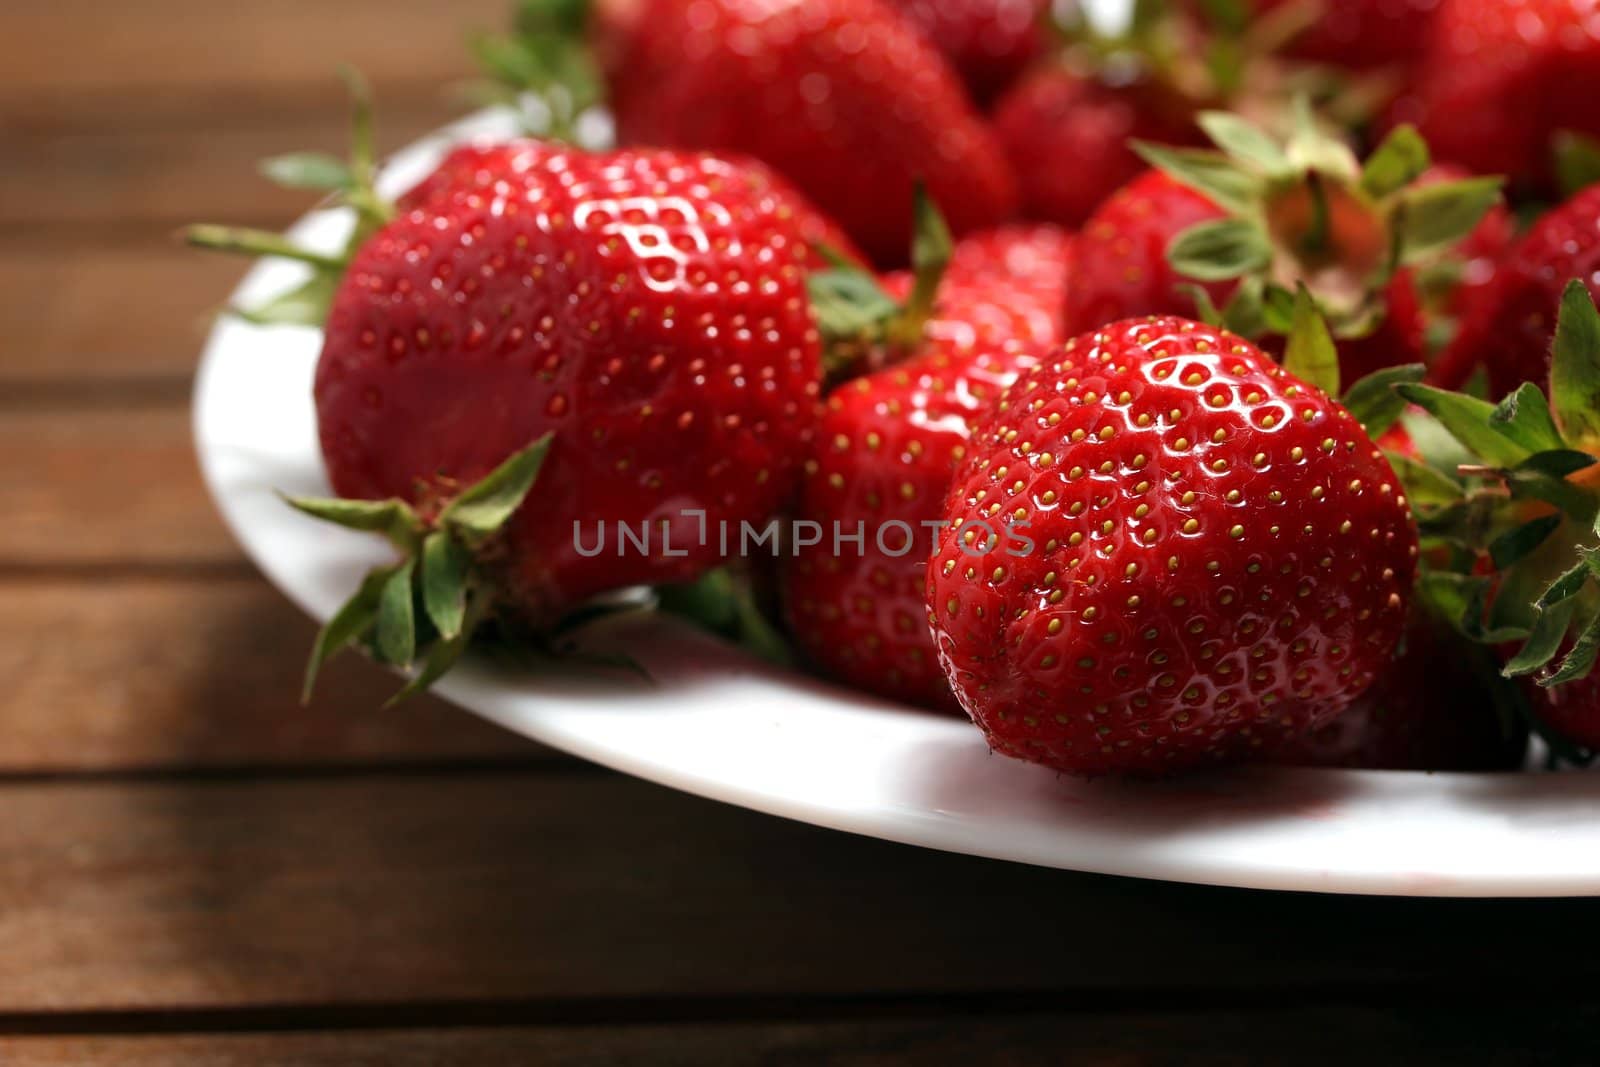 a plate of fresh strawberries